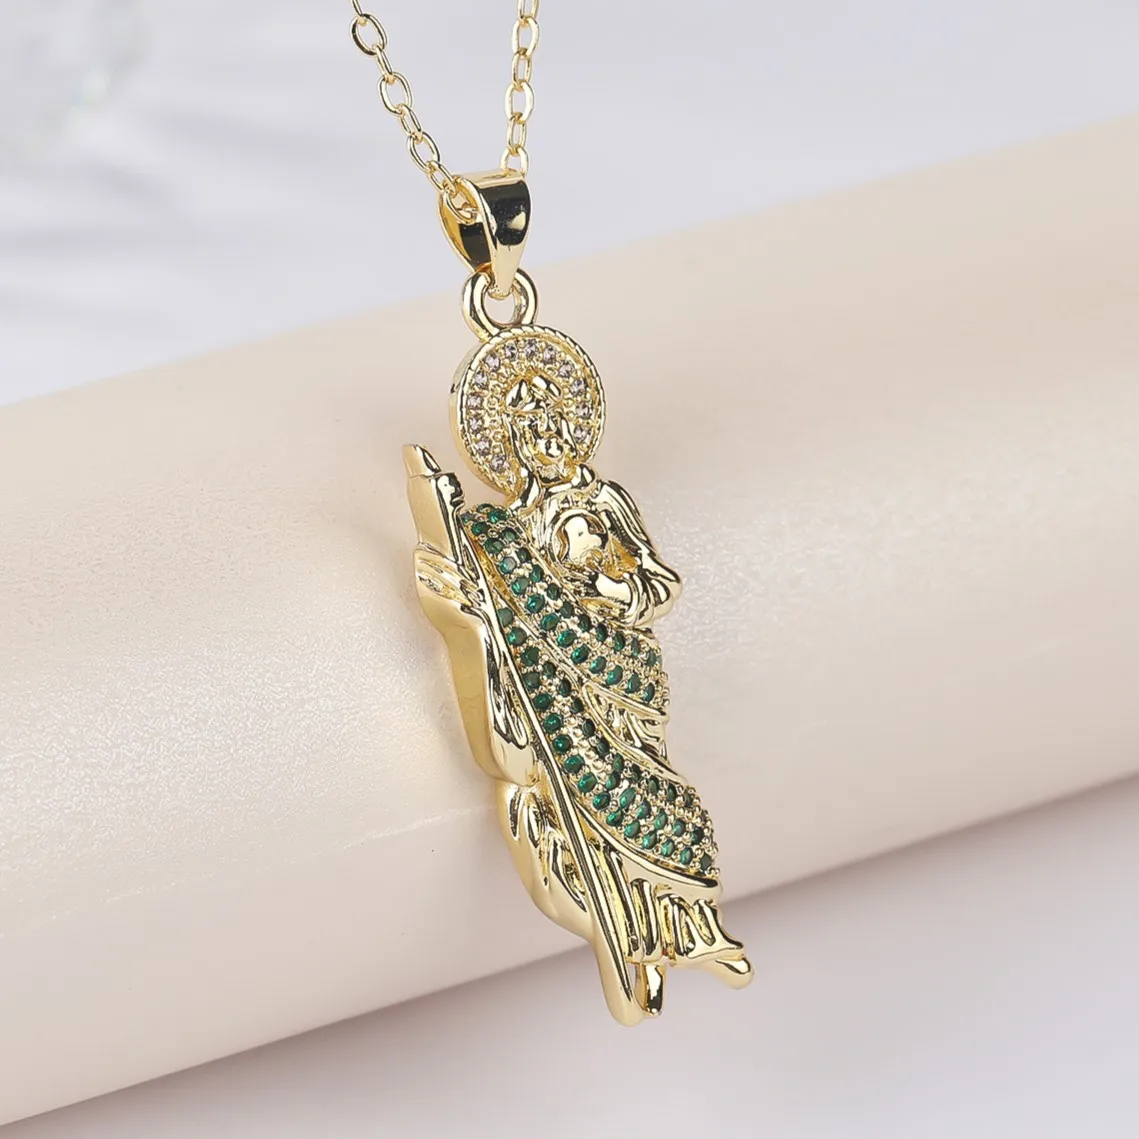 

Variety of Luxury Styles San Judas Tadeo Necklace CZ Gold Plated Jewelry Religious Jewelry Gift for Her Saint Jude Thaddeus